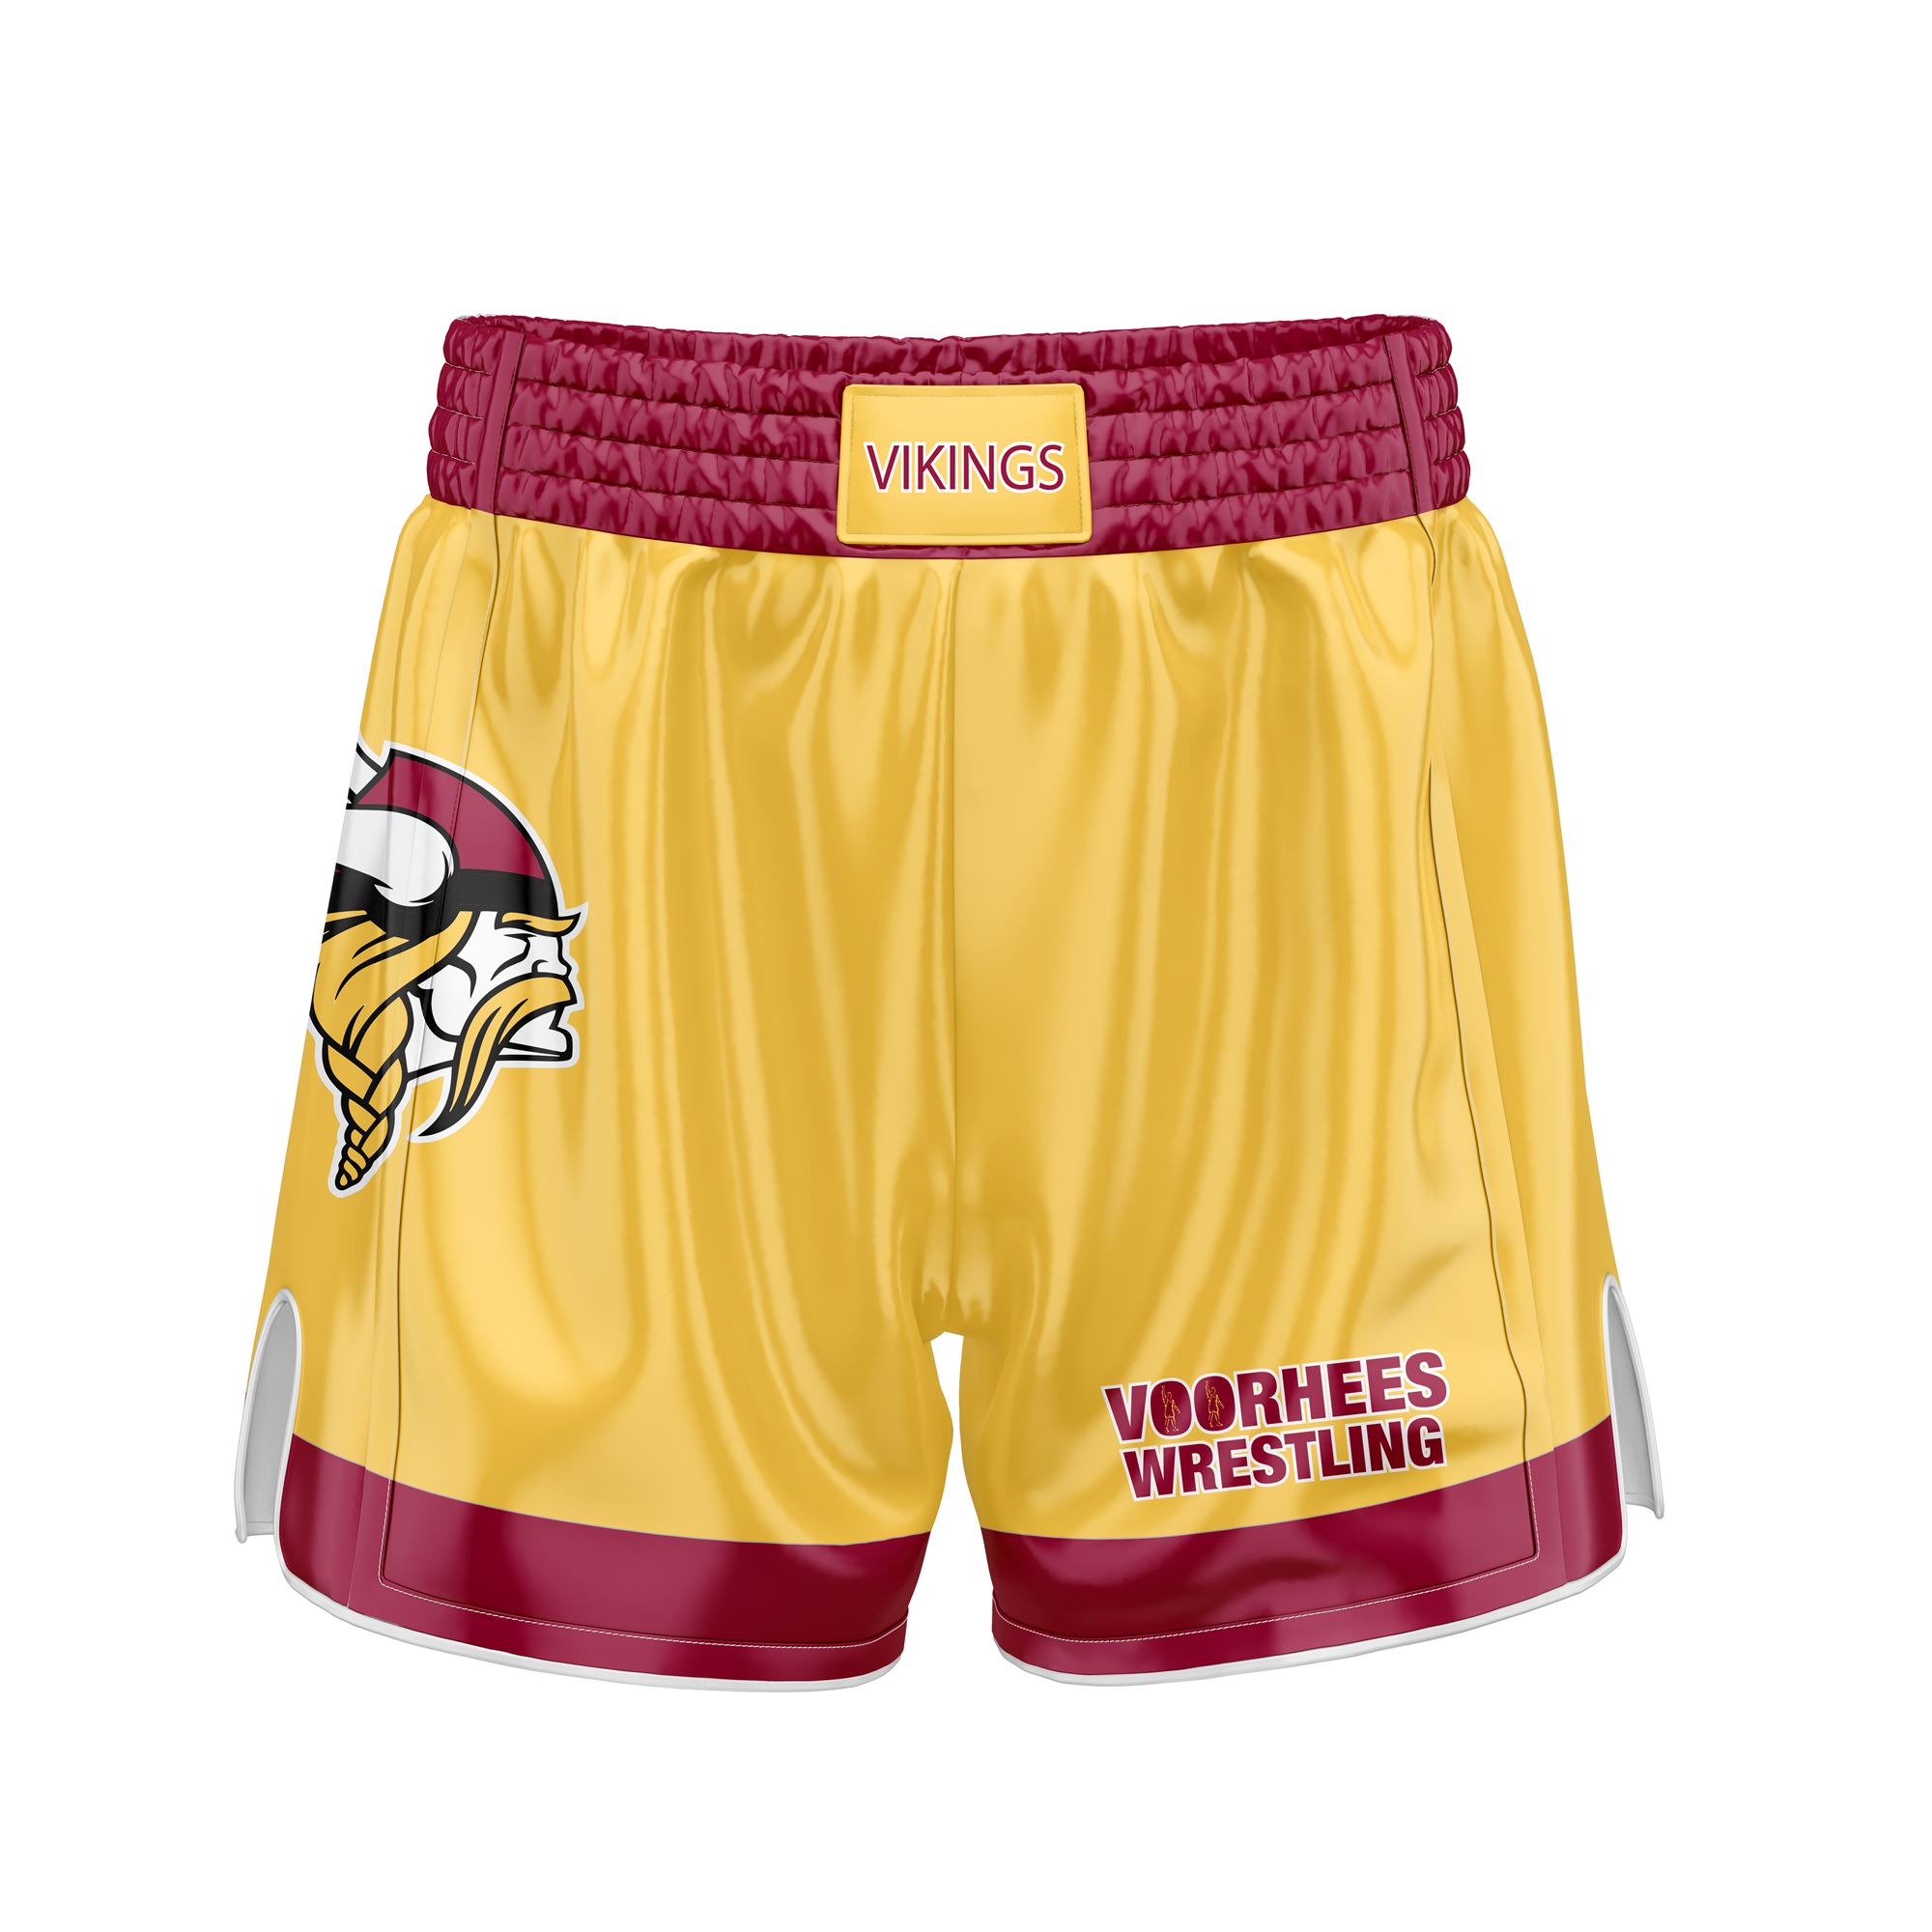 VOORHEES WRESTLING Sublimated Fight Shorts